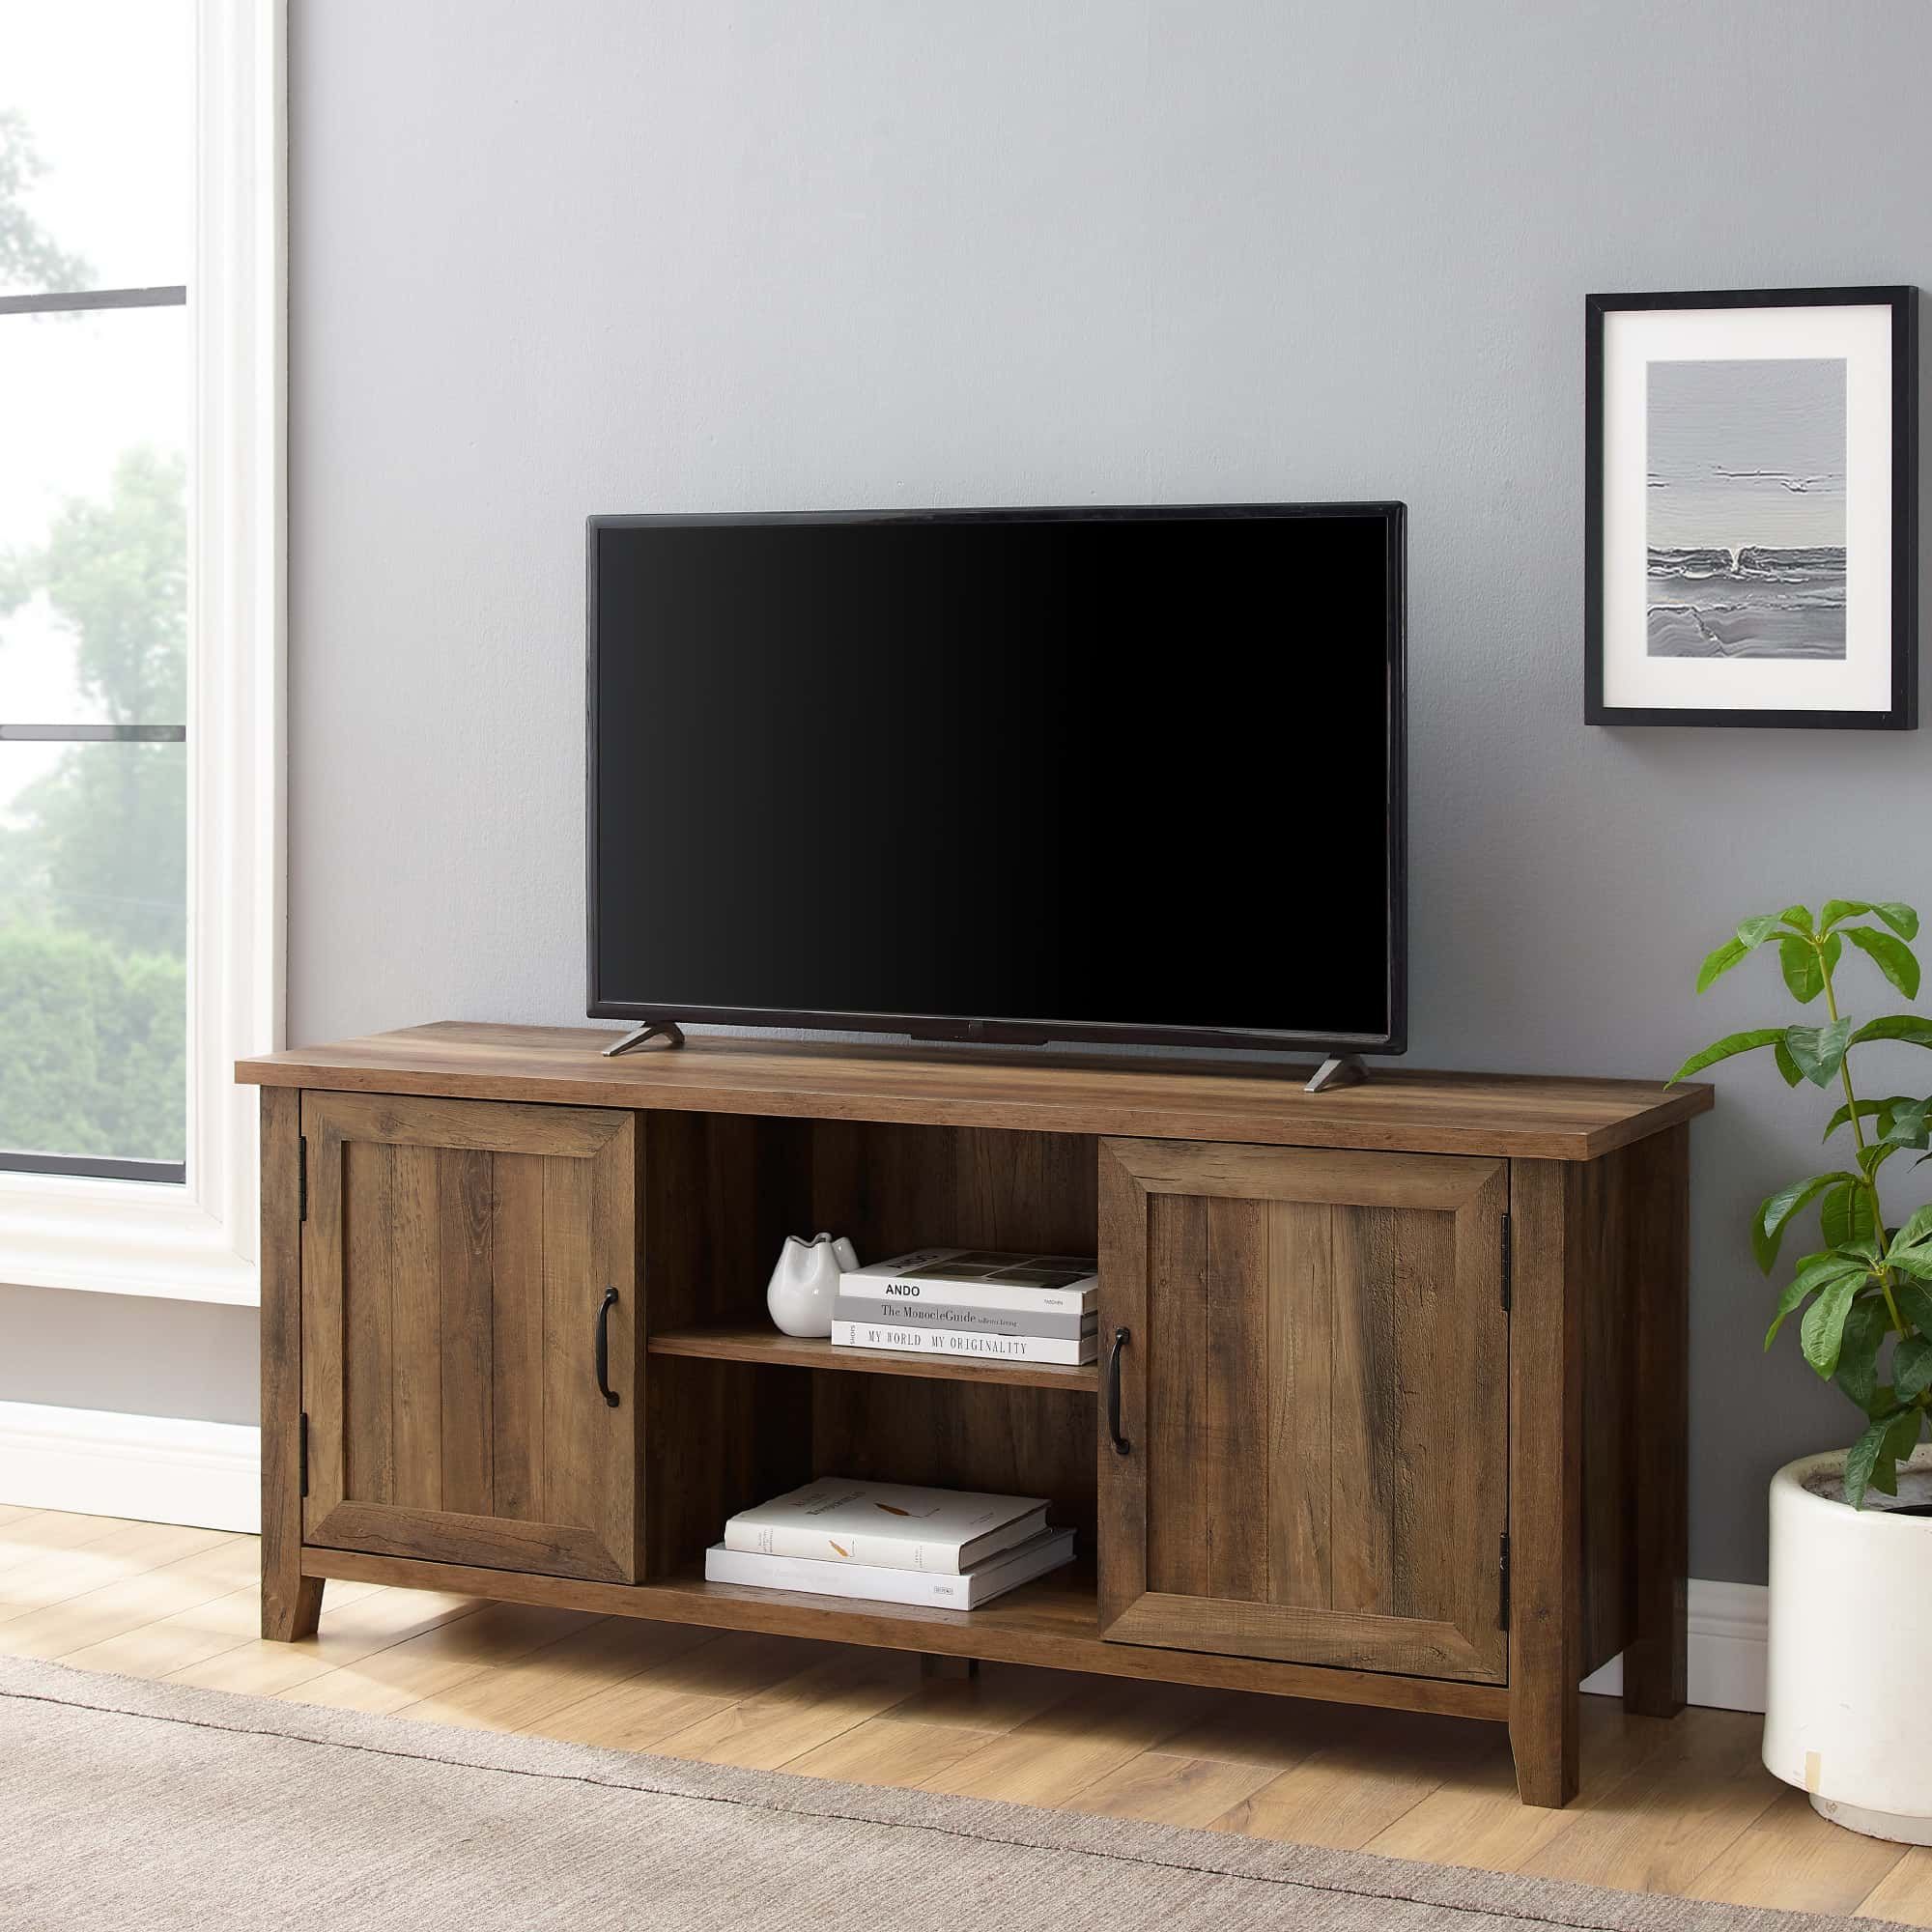 58 Inch Modern Farmhouse Tv Stand – Rustic Oakwalker Edison Intended For Modern Farmhouse Rustic Tv Stands (View 7 of 15)